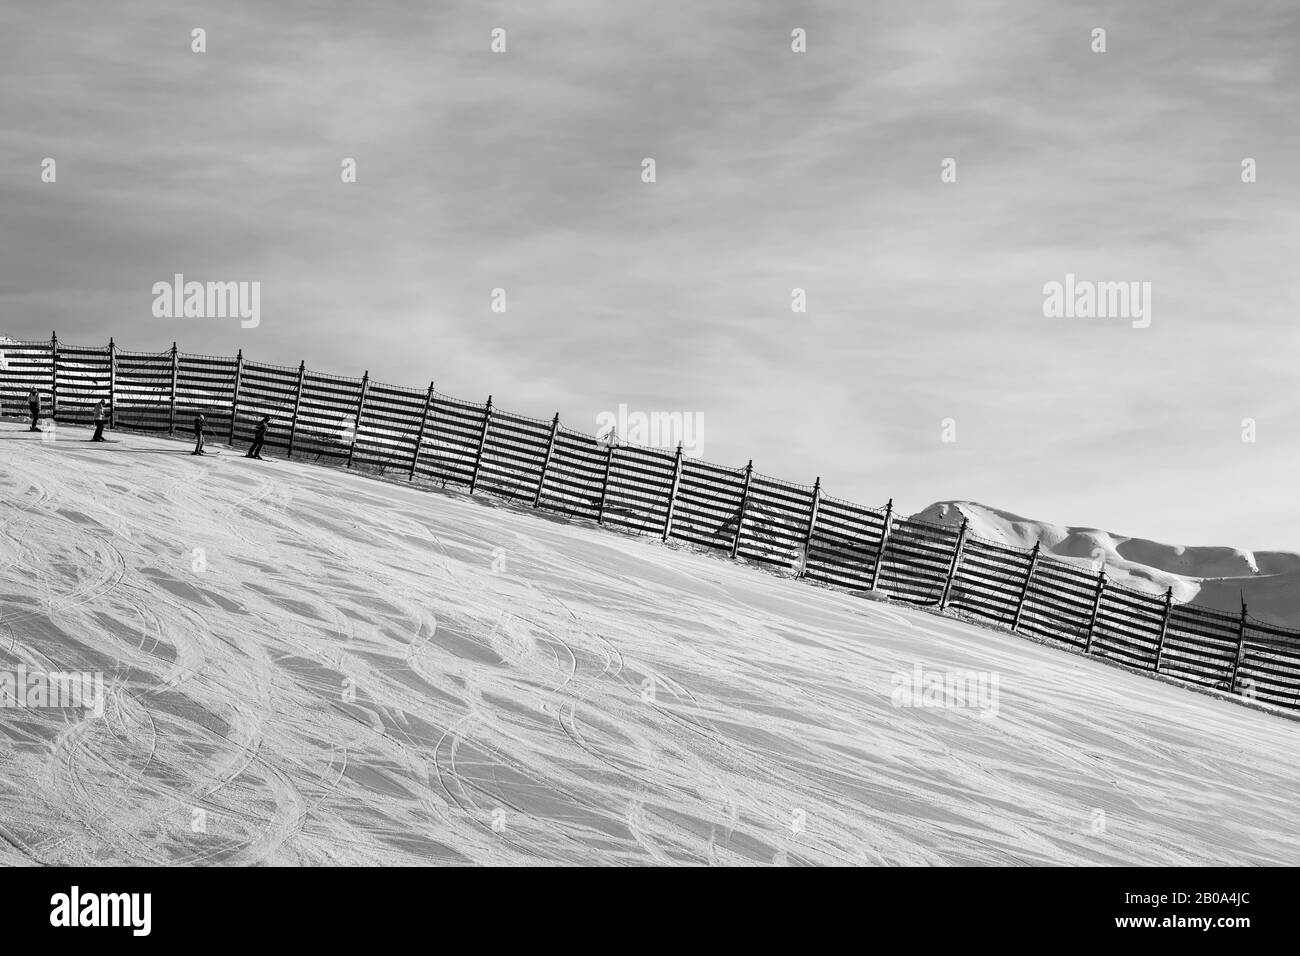 Snowy ski track prepared by snowcat with trace from skis and snowboards. High mountains at sunny winter day. Italian Alps. Livigno, region of Lombardy Stock Photo